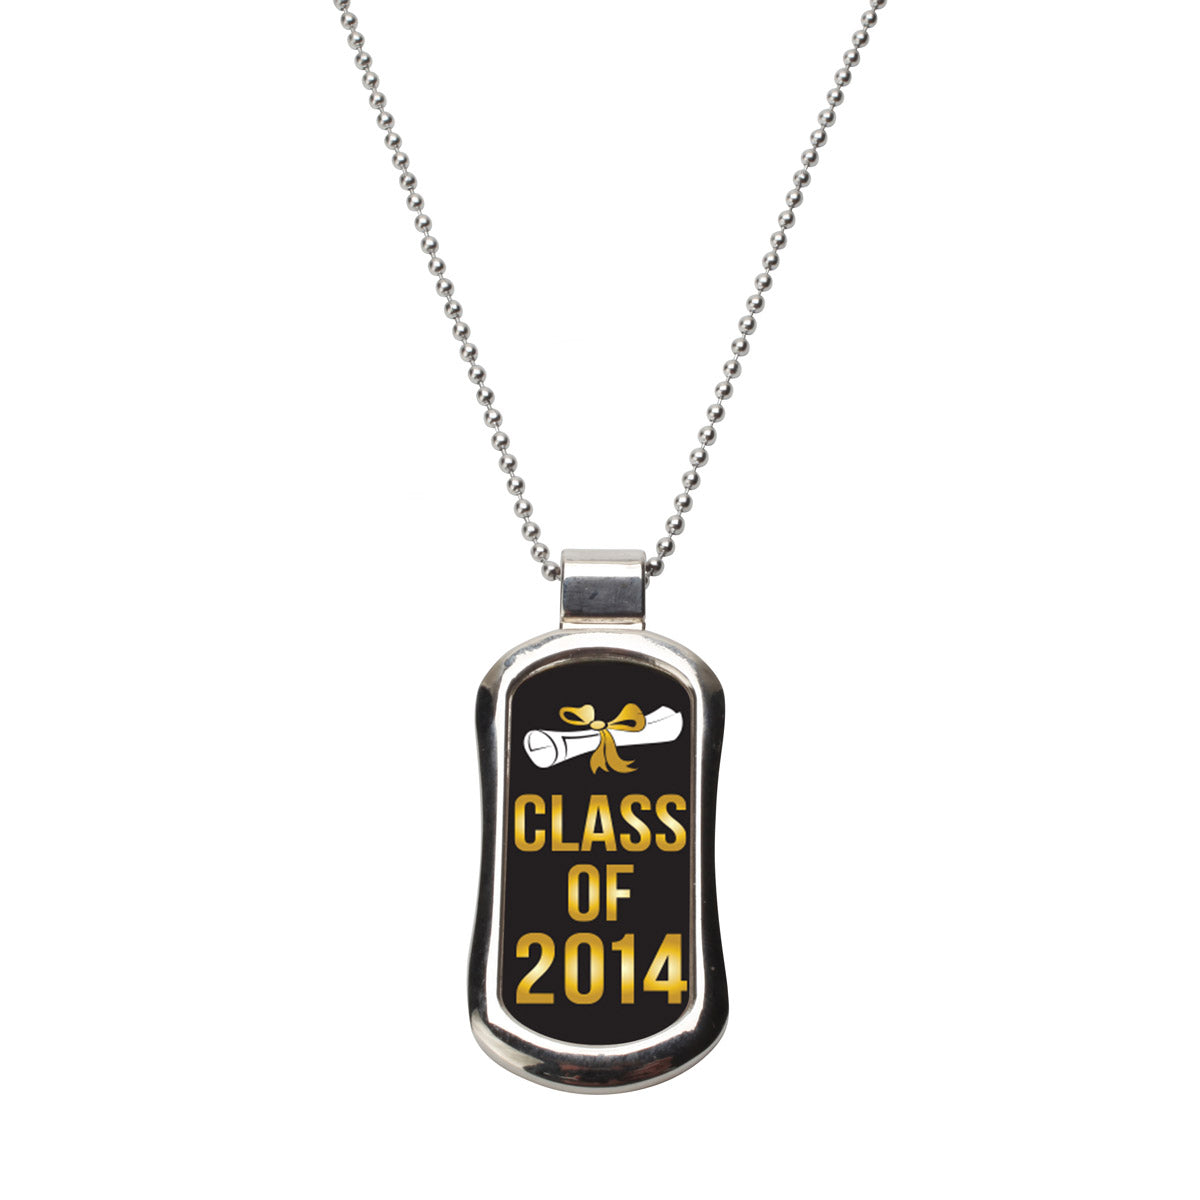 Steel Class of 2014 Dog Tag Necklace